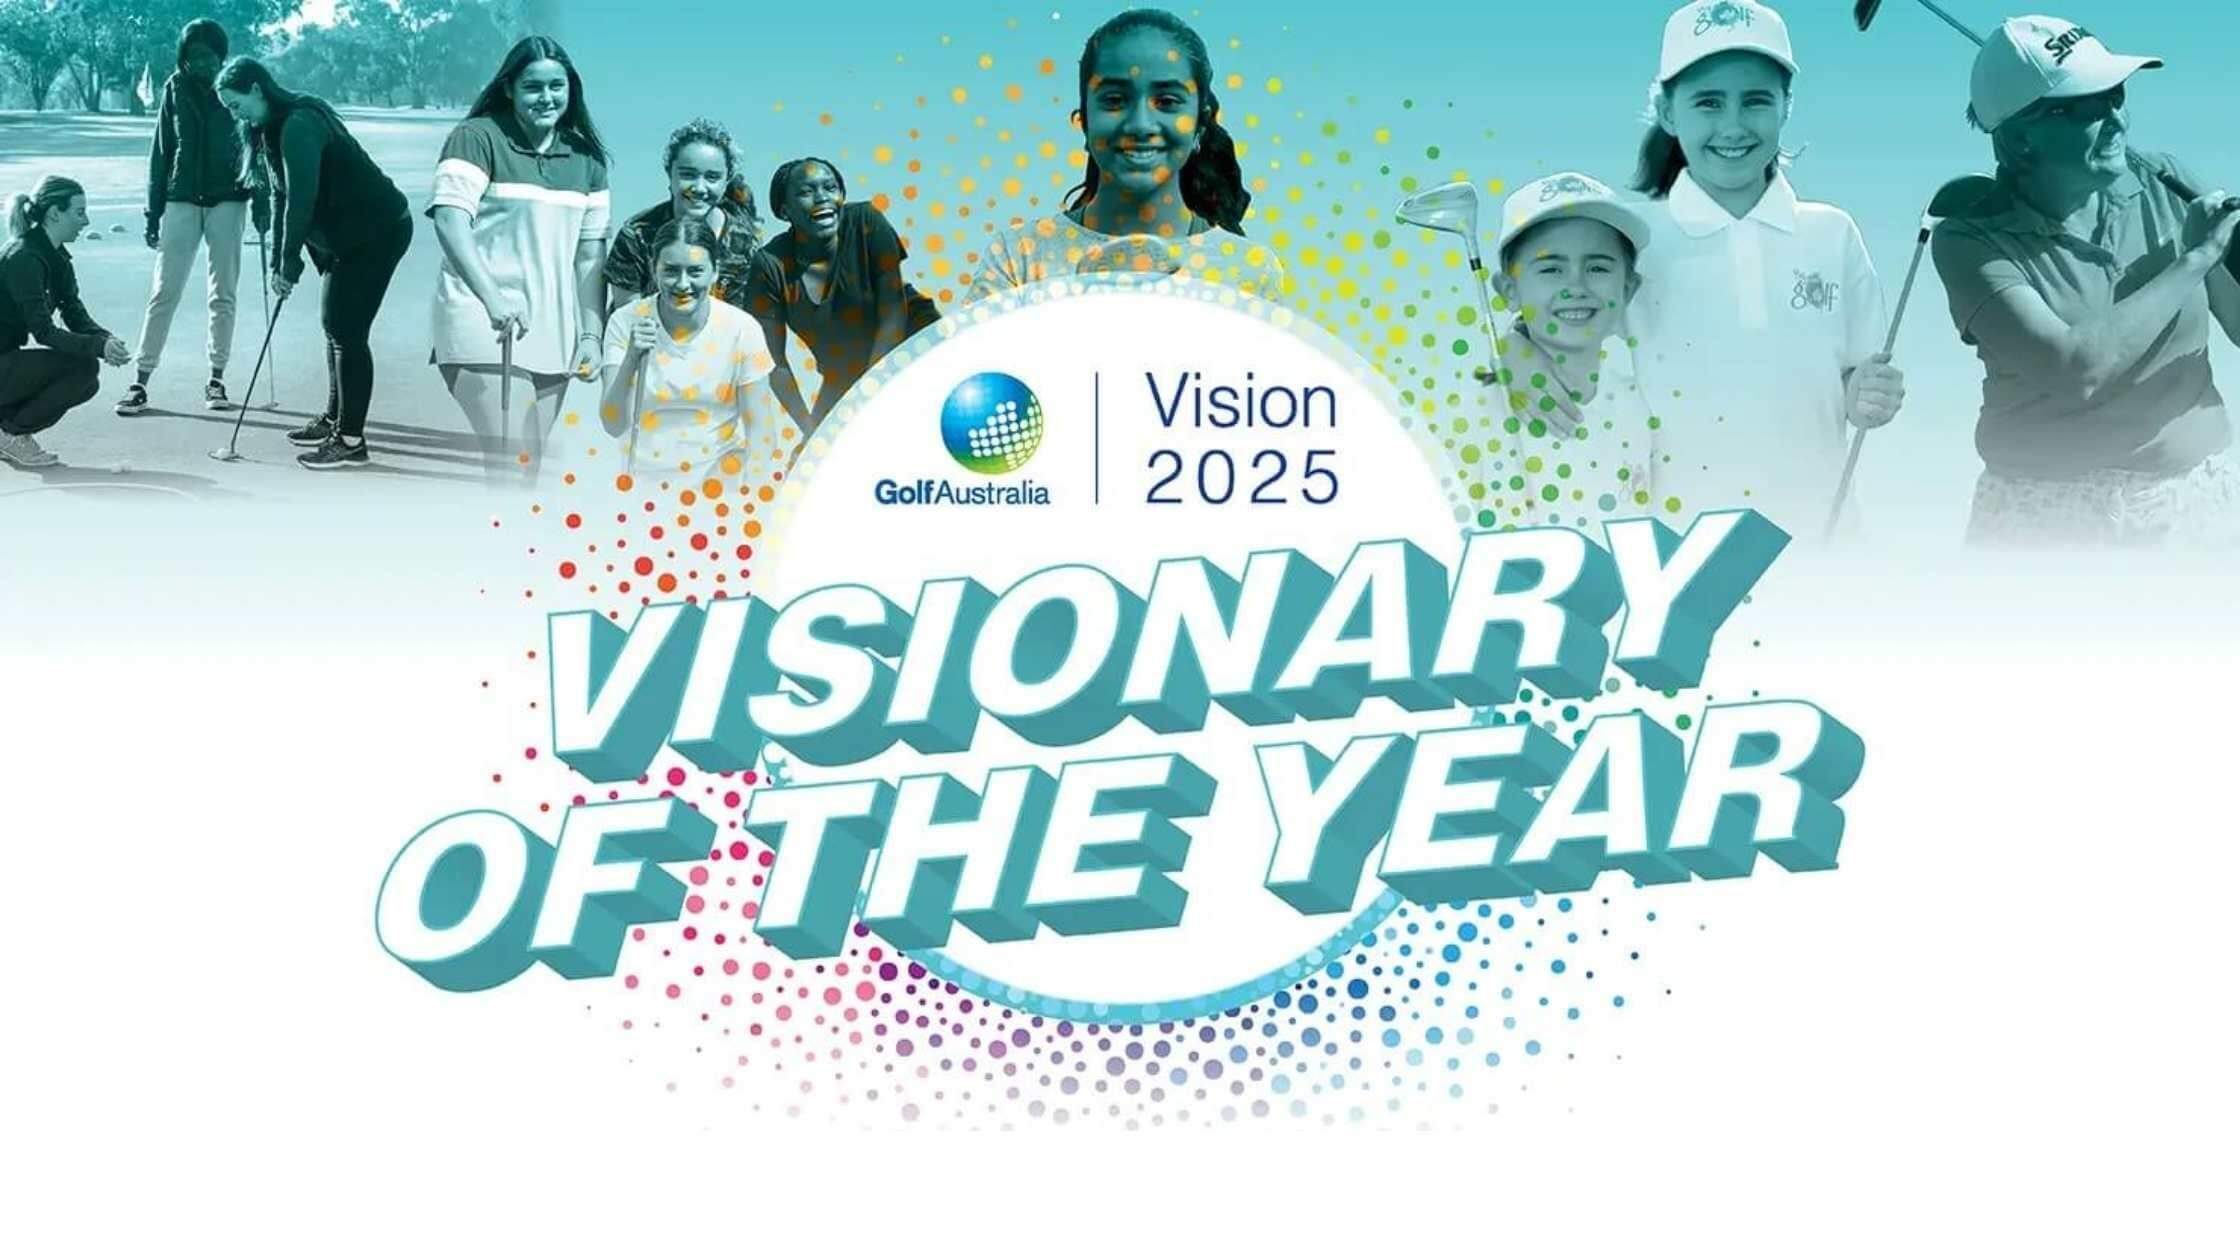 The Visionary of the Year Program Aims to Promote Gender Equality in Golf